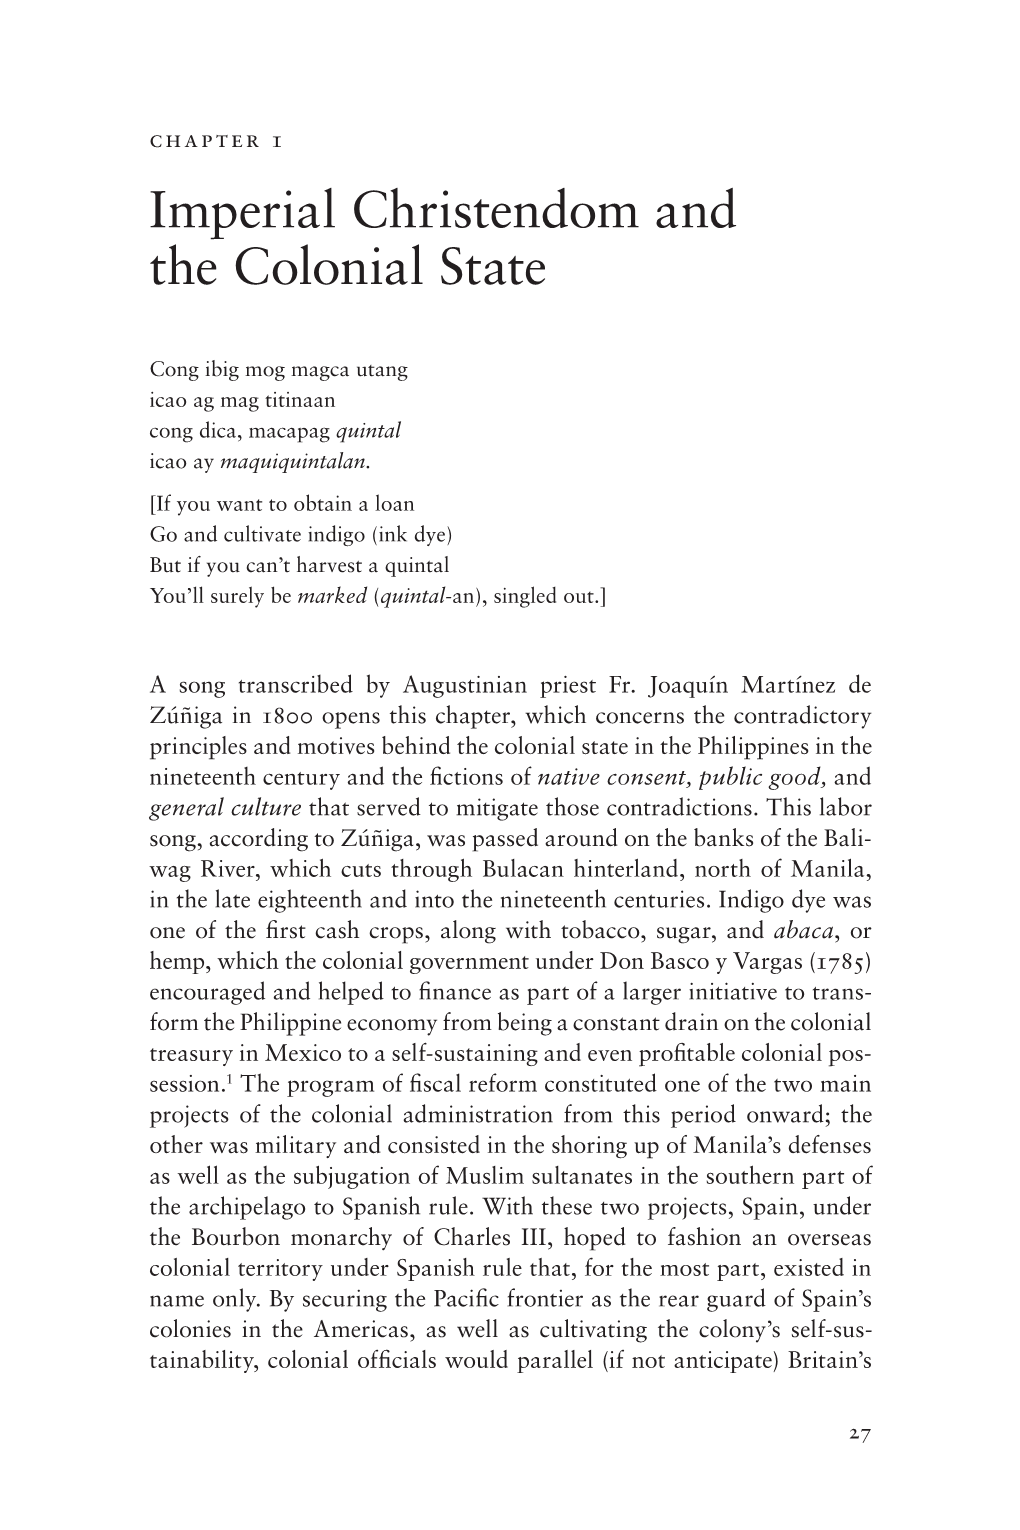 Imperial Christendom and the Colonial State